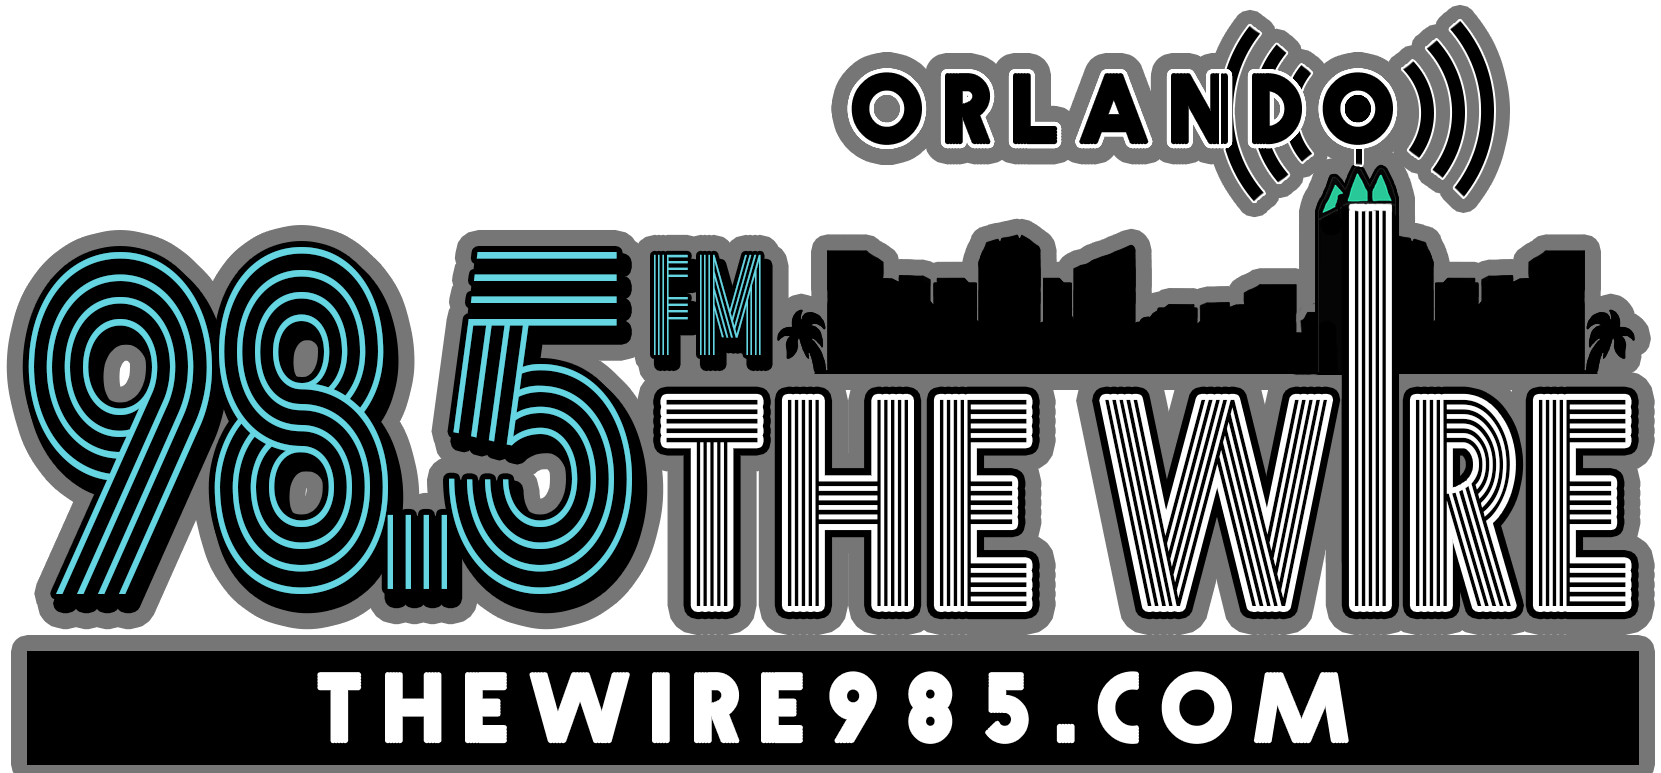 98.5 The Wire